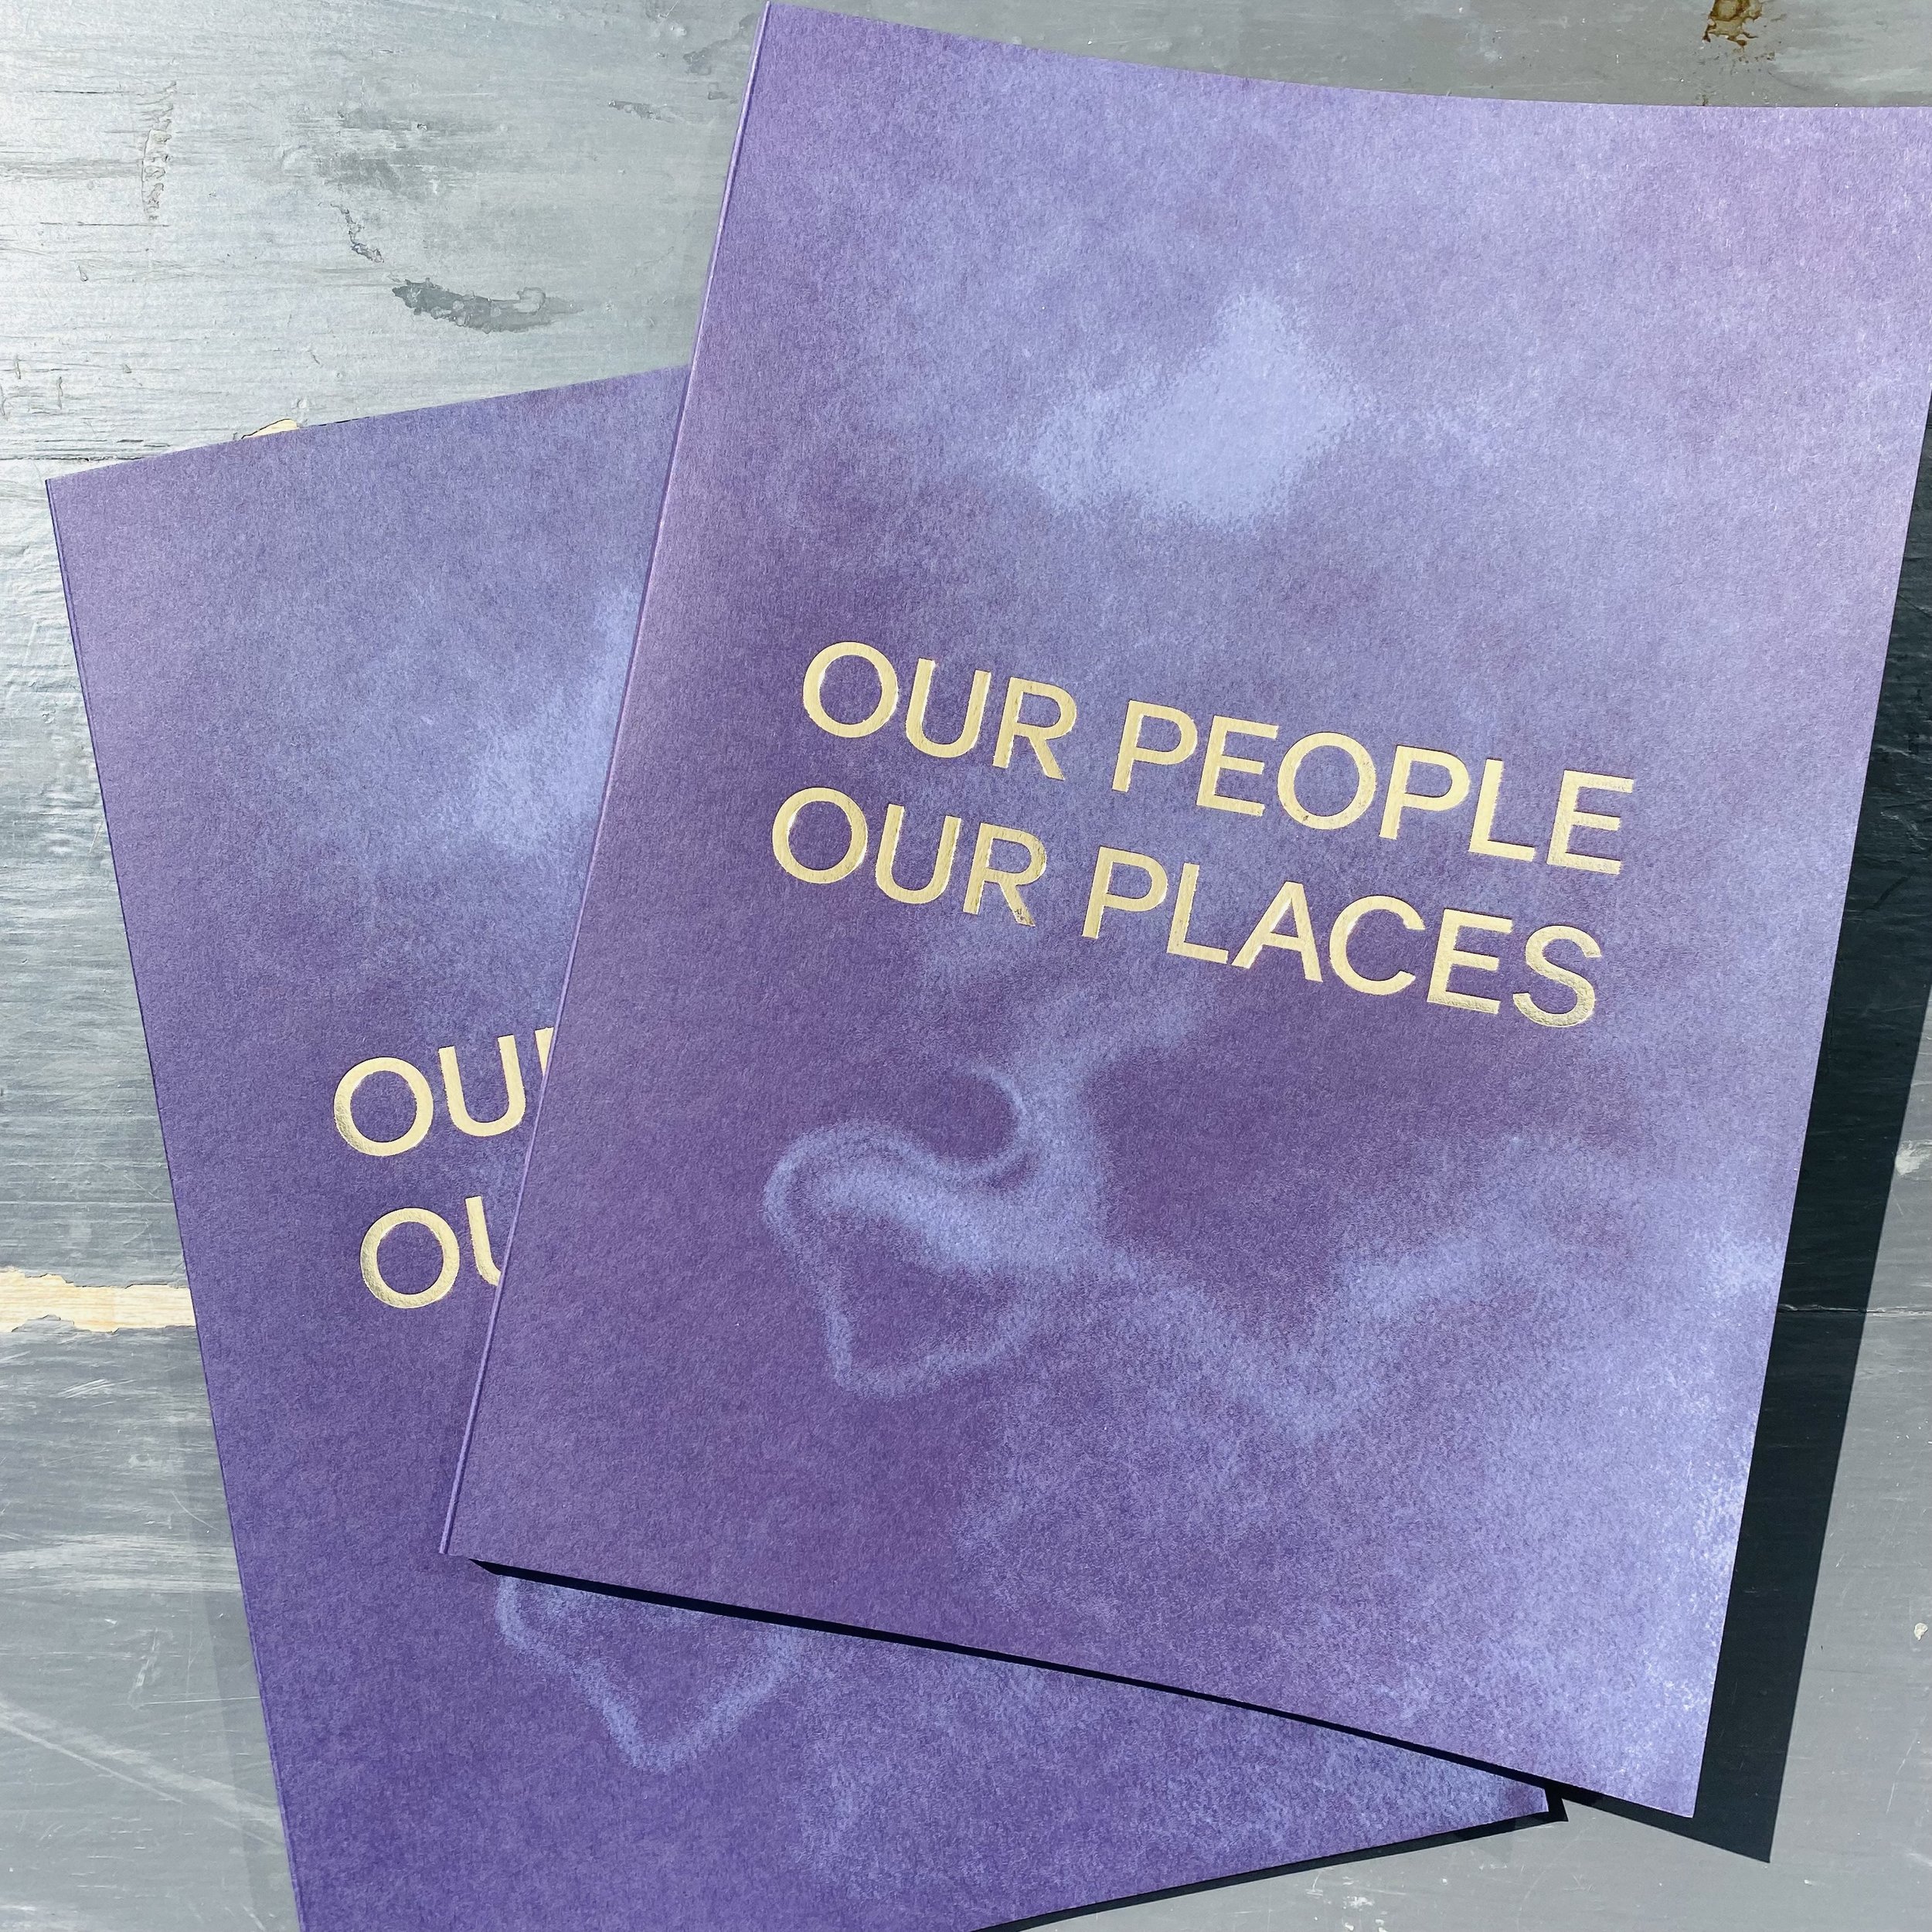  The Our People, Our Places publication is part of a project led by Appetite and GRAIN Projects who invited people to take part in a collaborative photography project about life in Stoke-on-Trent and Newcastle-under-Lyme. Design by Chris Neophytou. 2